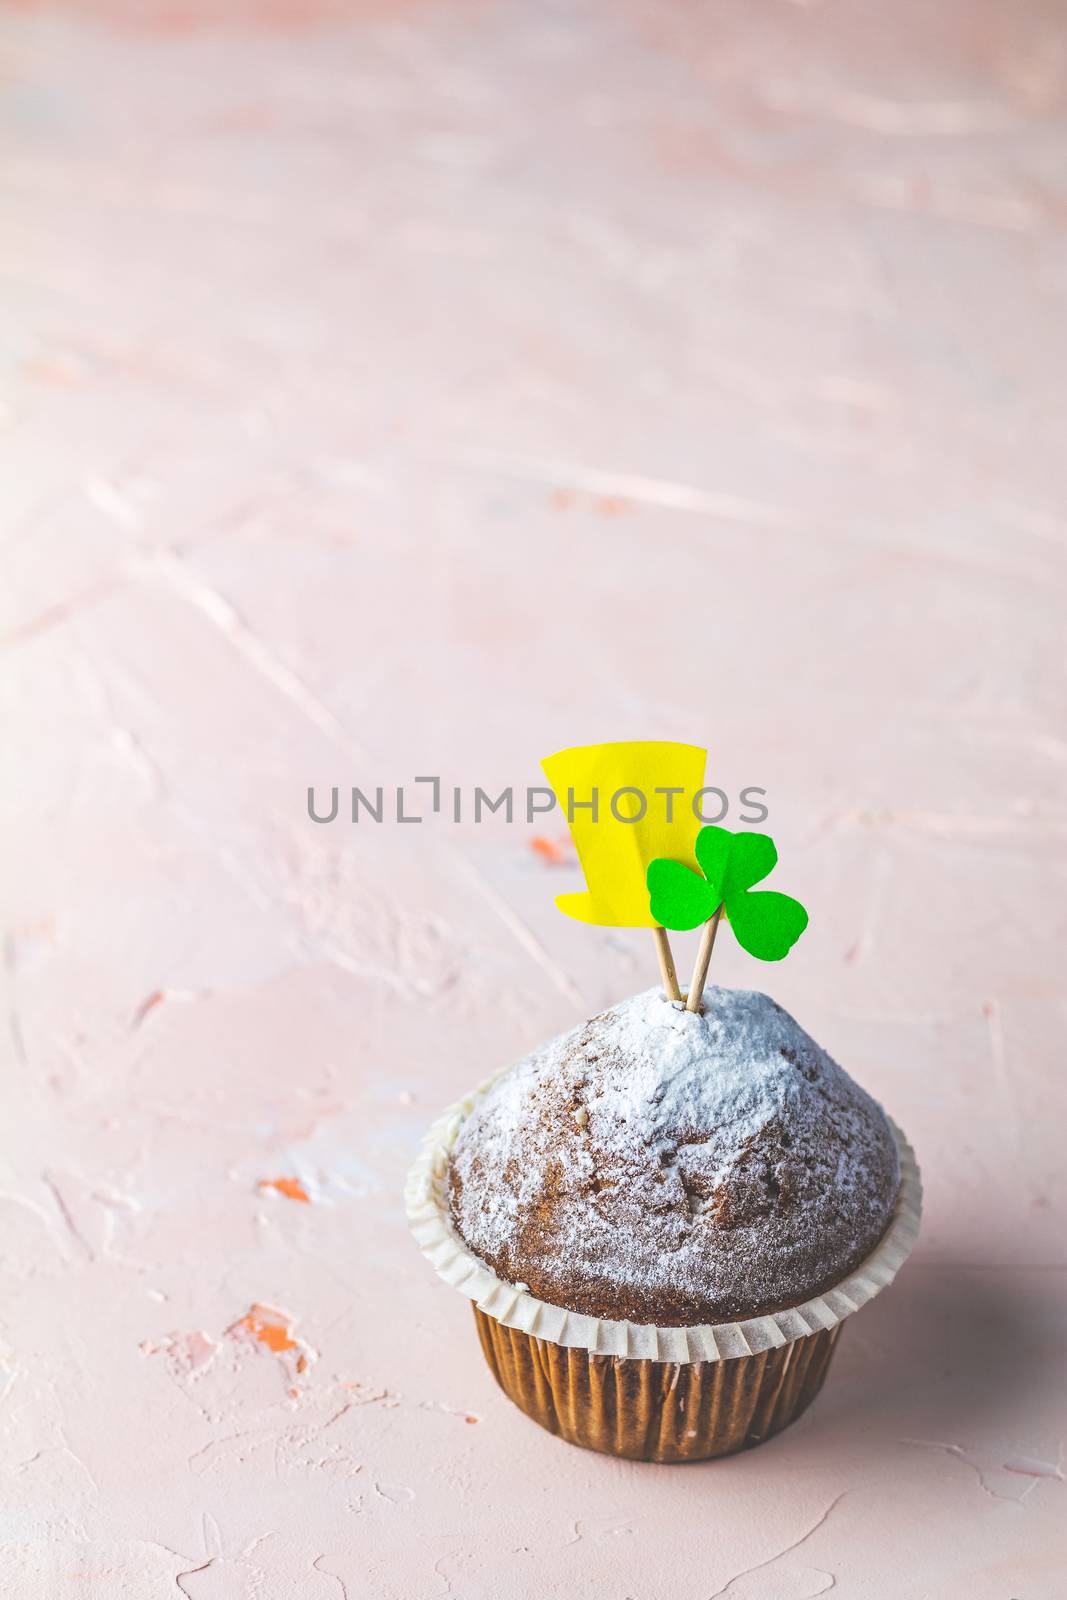 Sweet homemade muffin for Saint Patrick day. by ArtSvitlyna